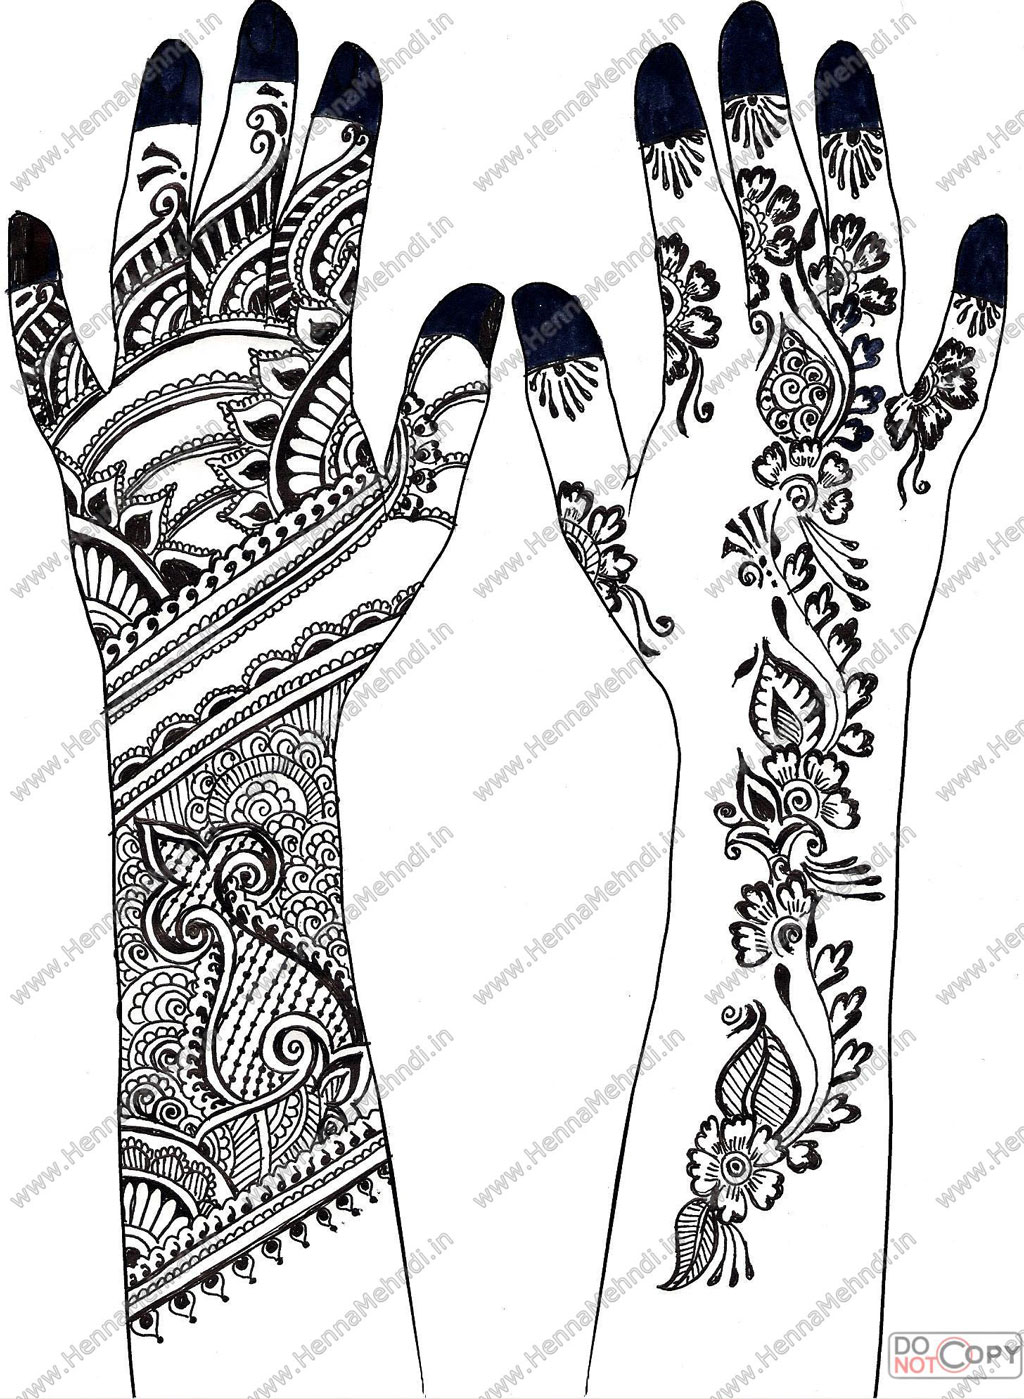 Free Sample Henna Designs and Patterns - Welcome to About.com